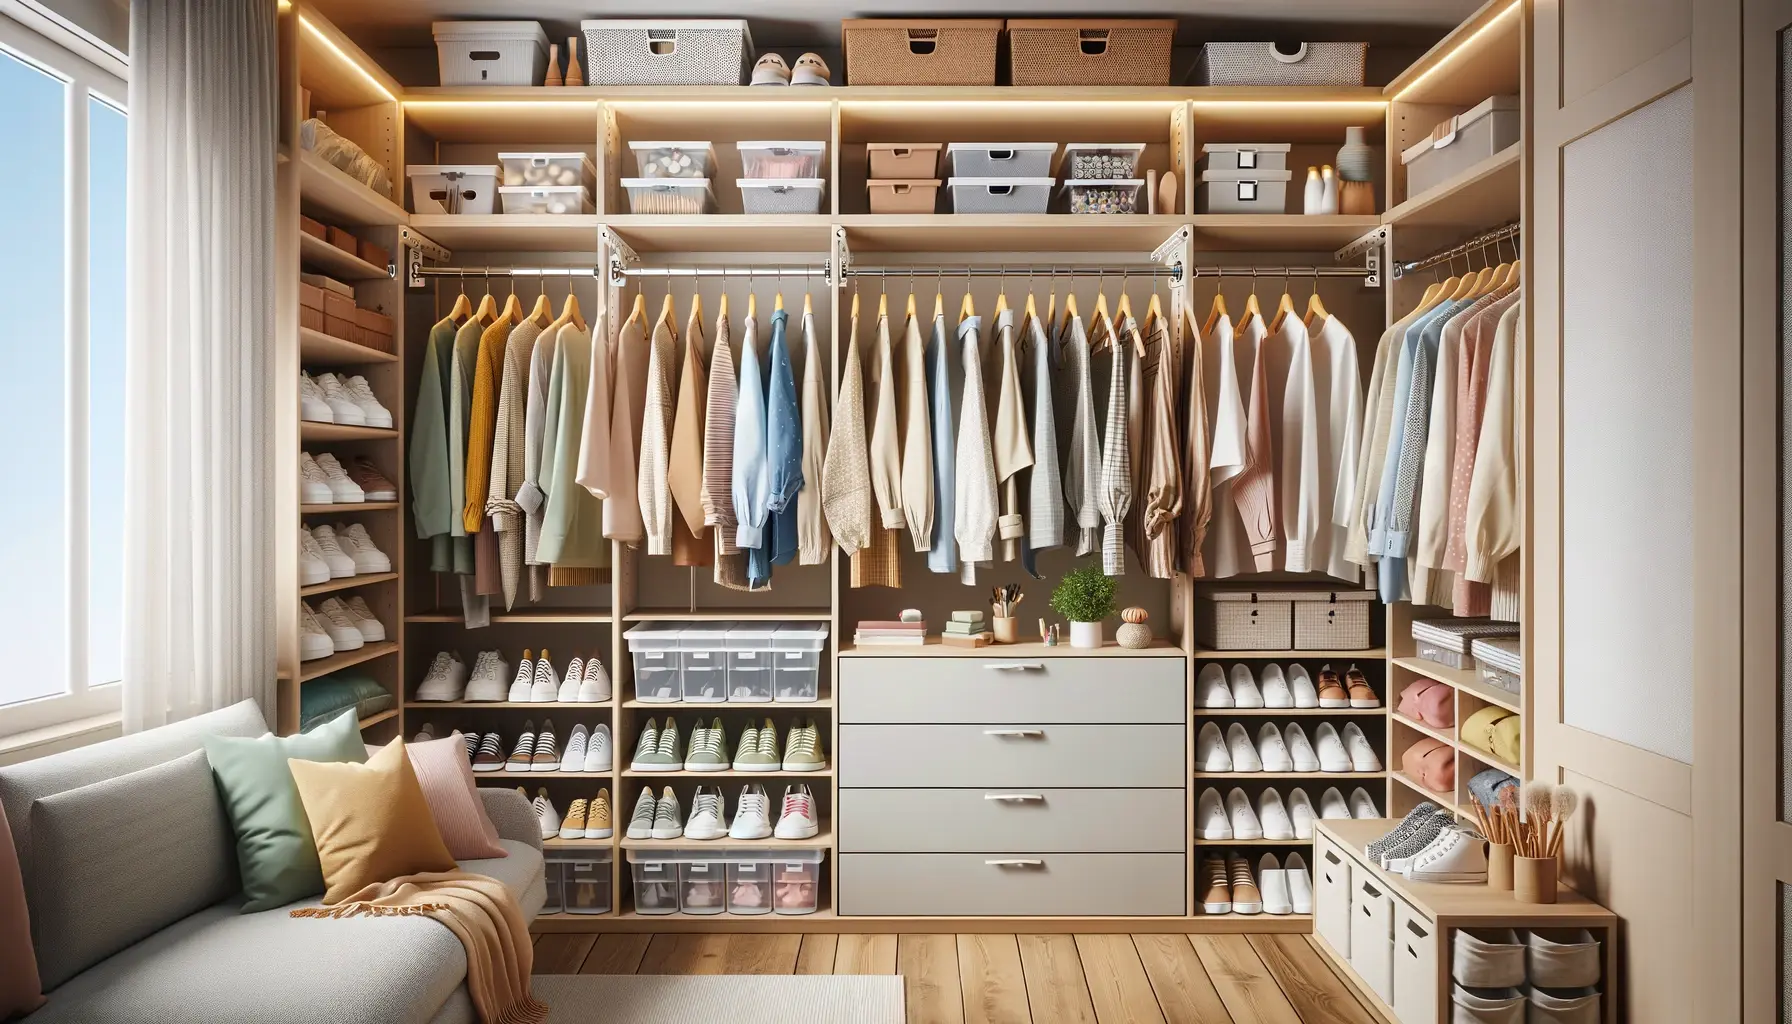 How to Design a Closet Organization System That Works for You